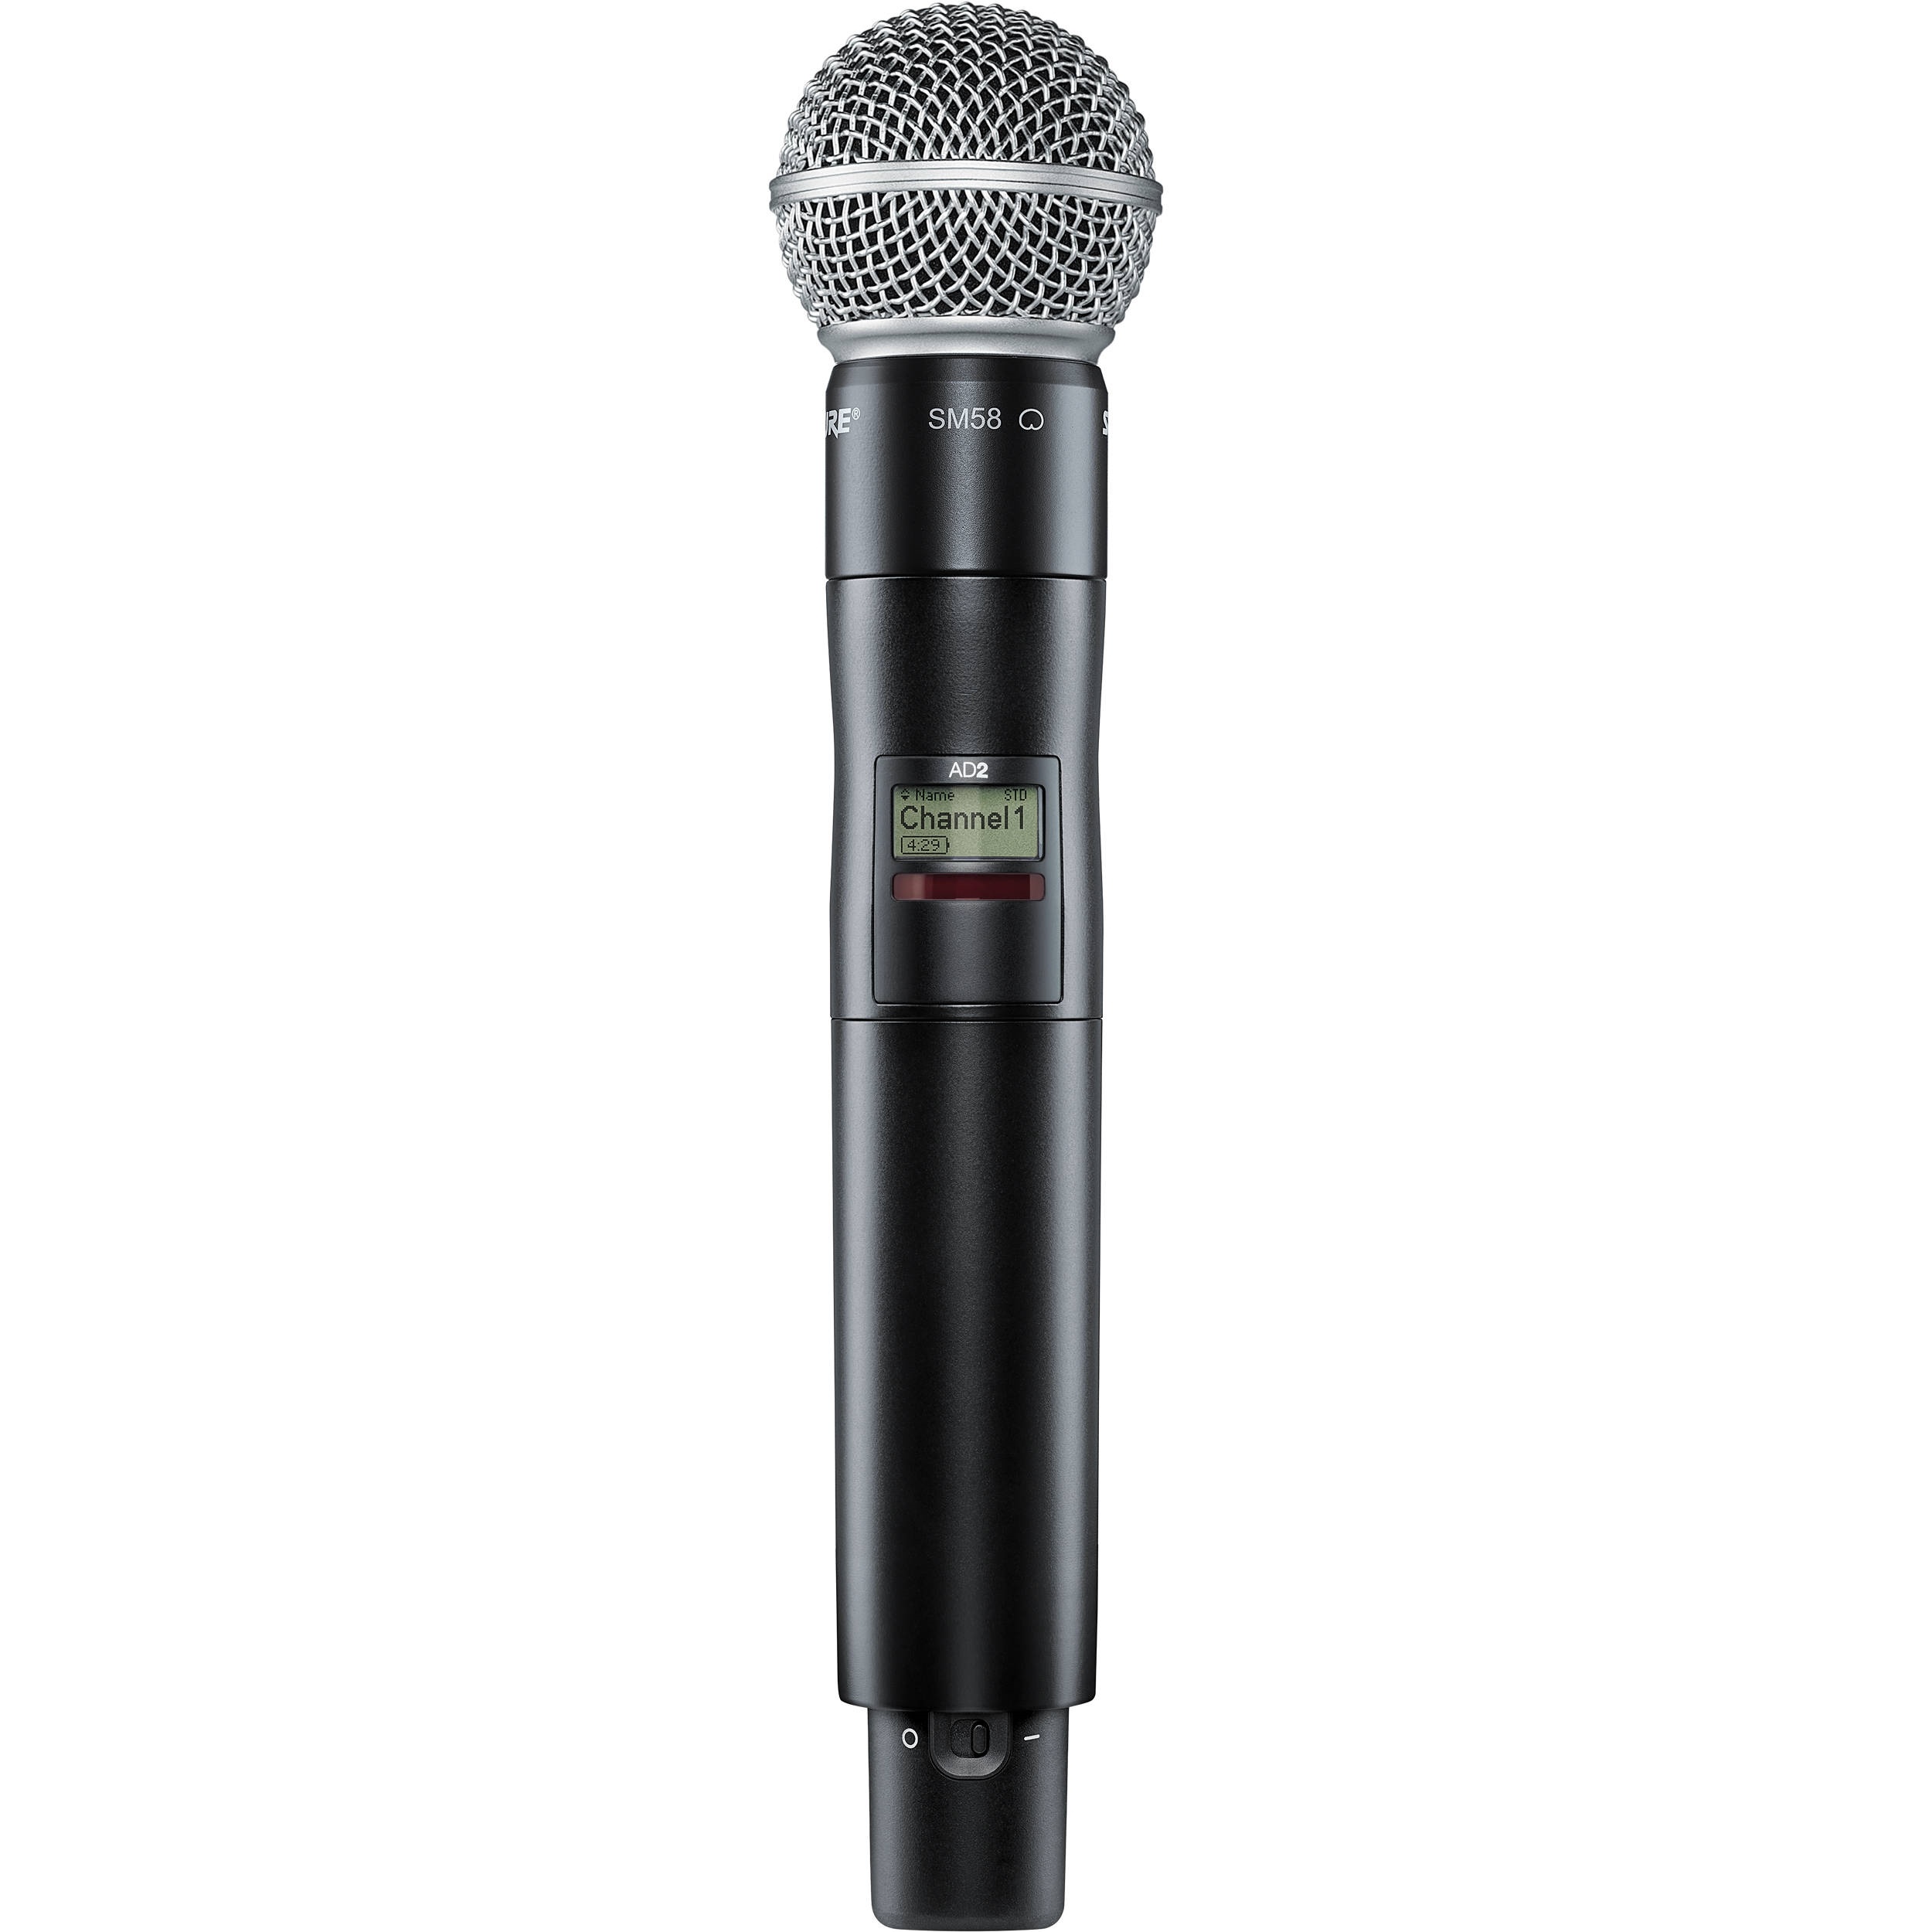 Shure AD2/SM58 Digital Handheld Wireless Microphone Transmitter with SM58 Capsule